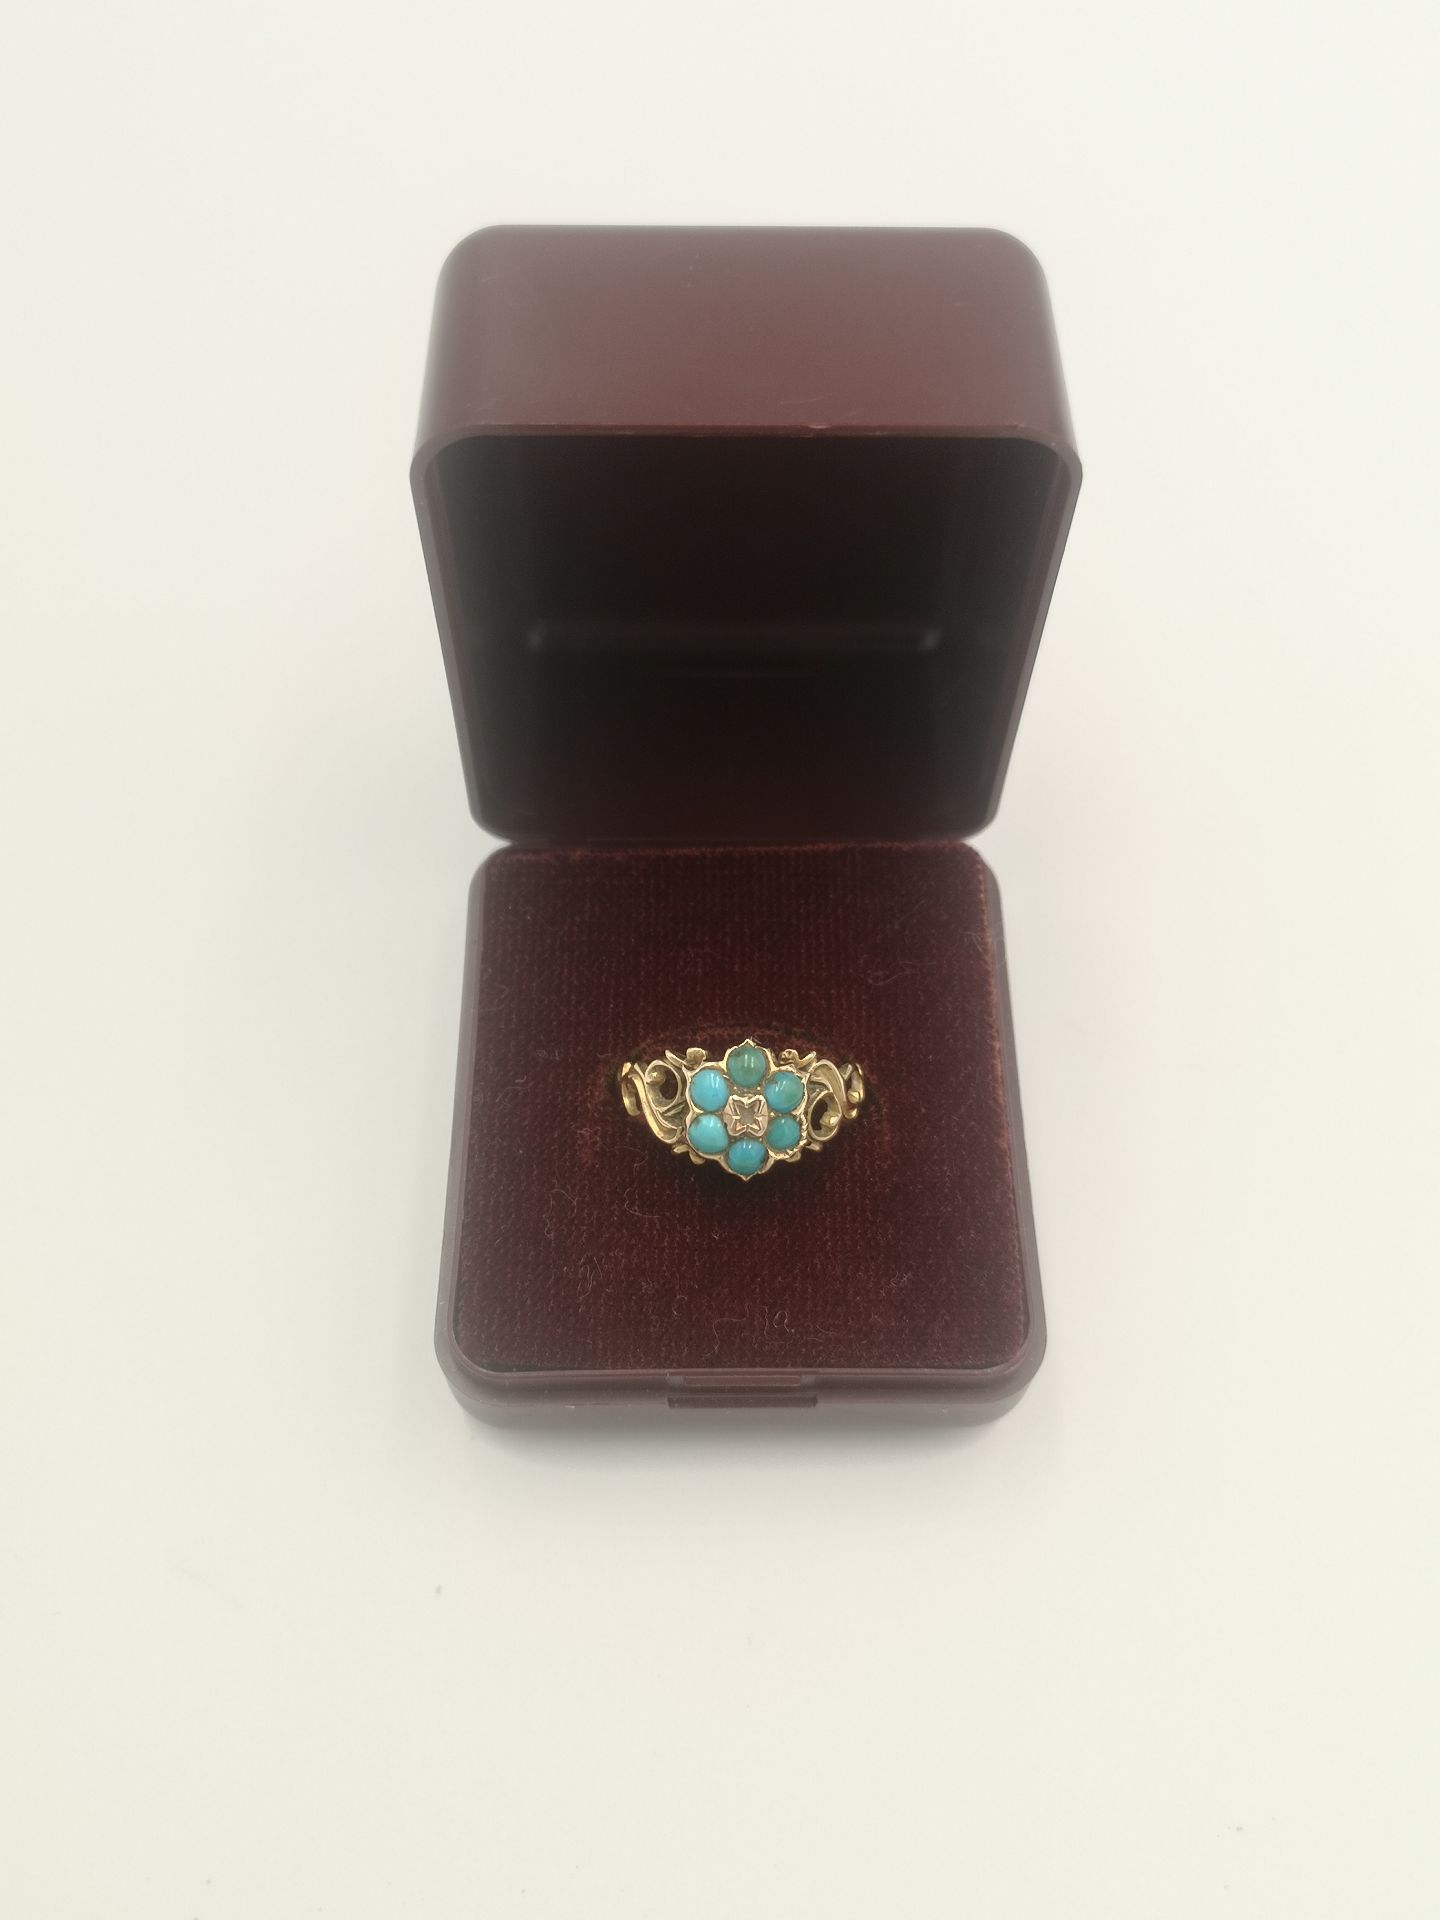 15ct gold ring set with turquoise - Image 5 of 5